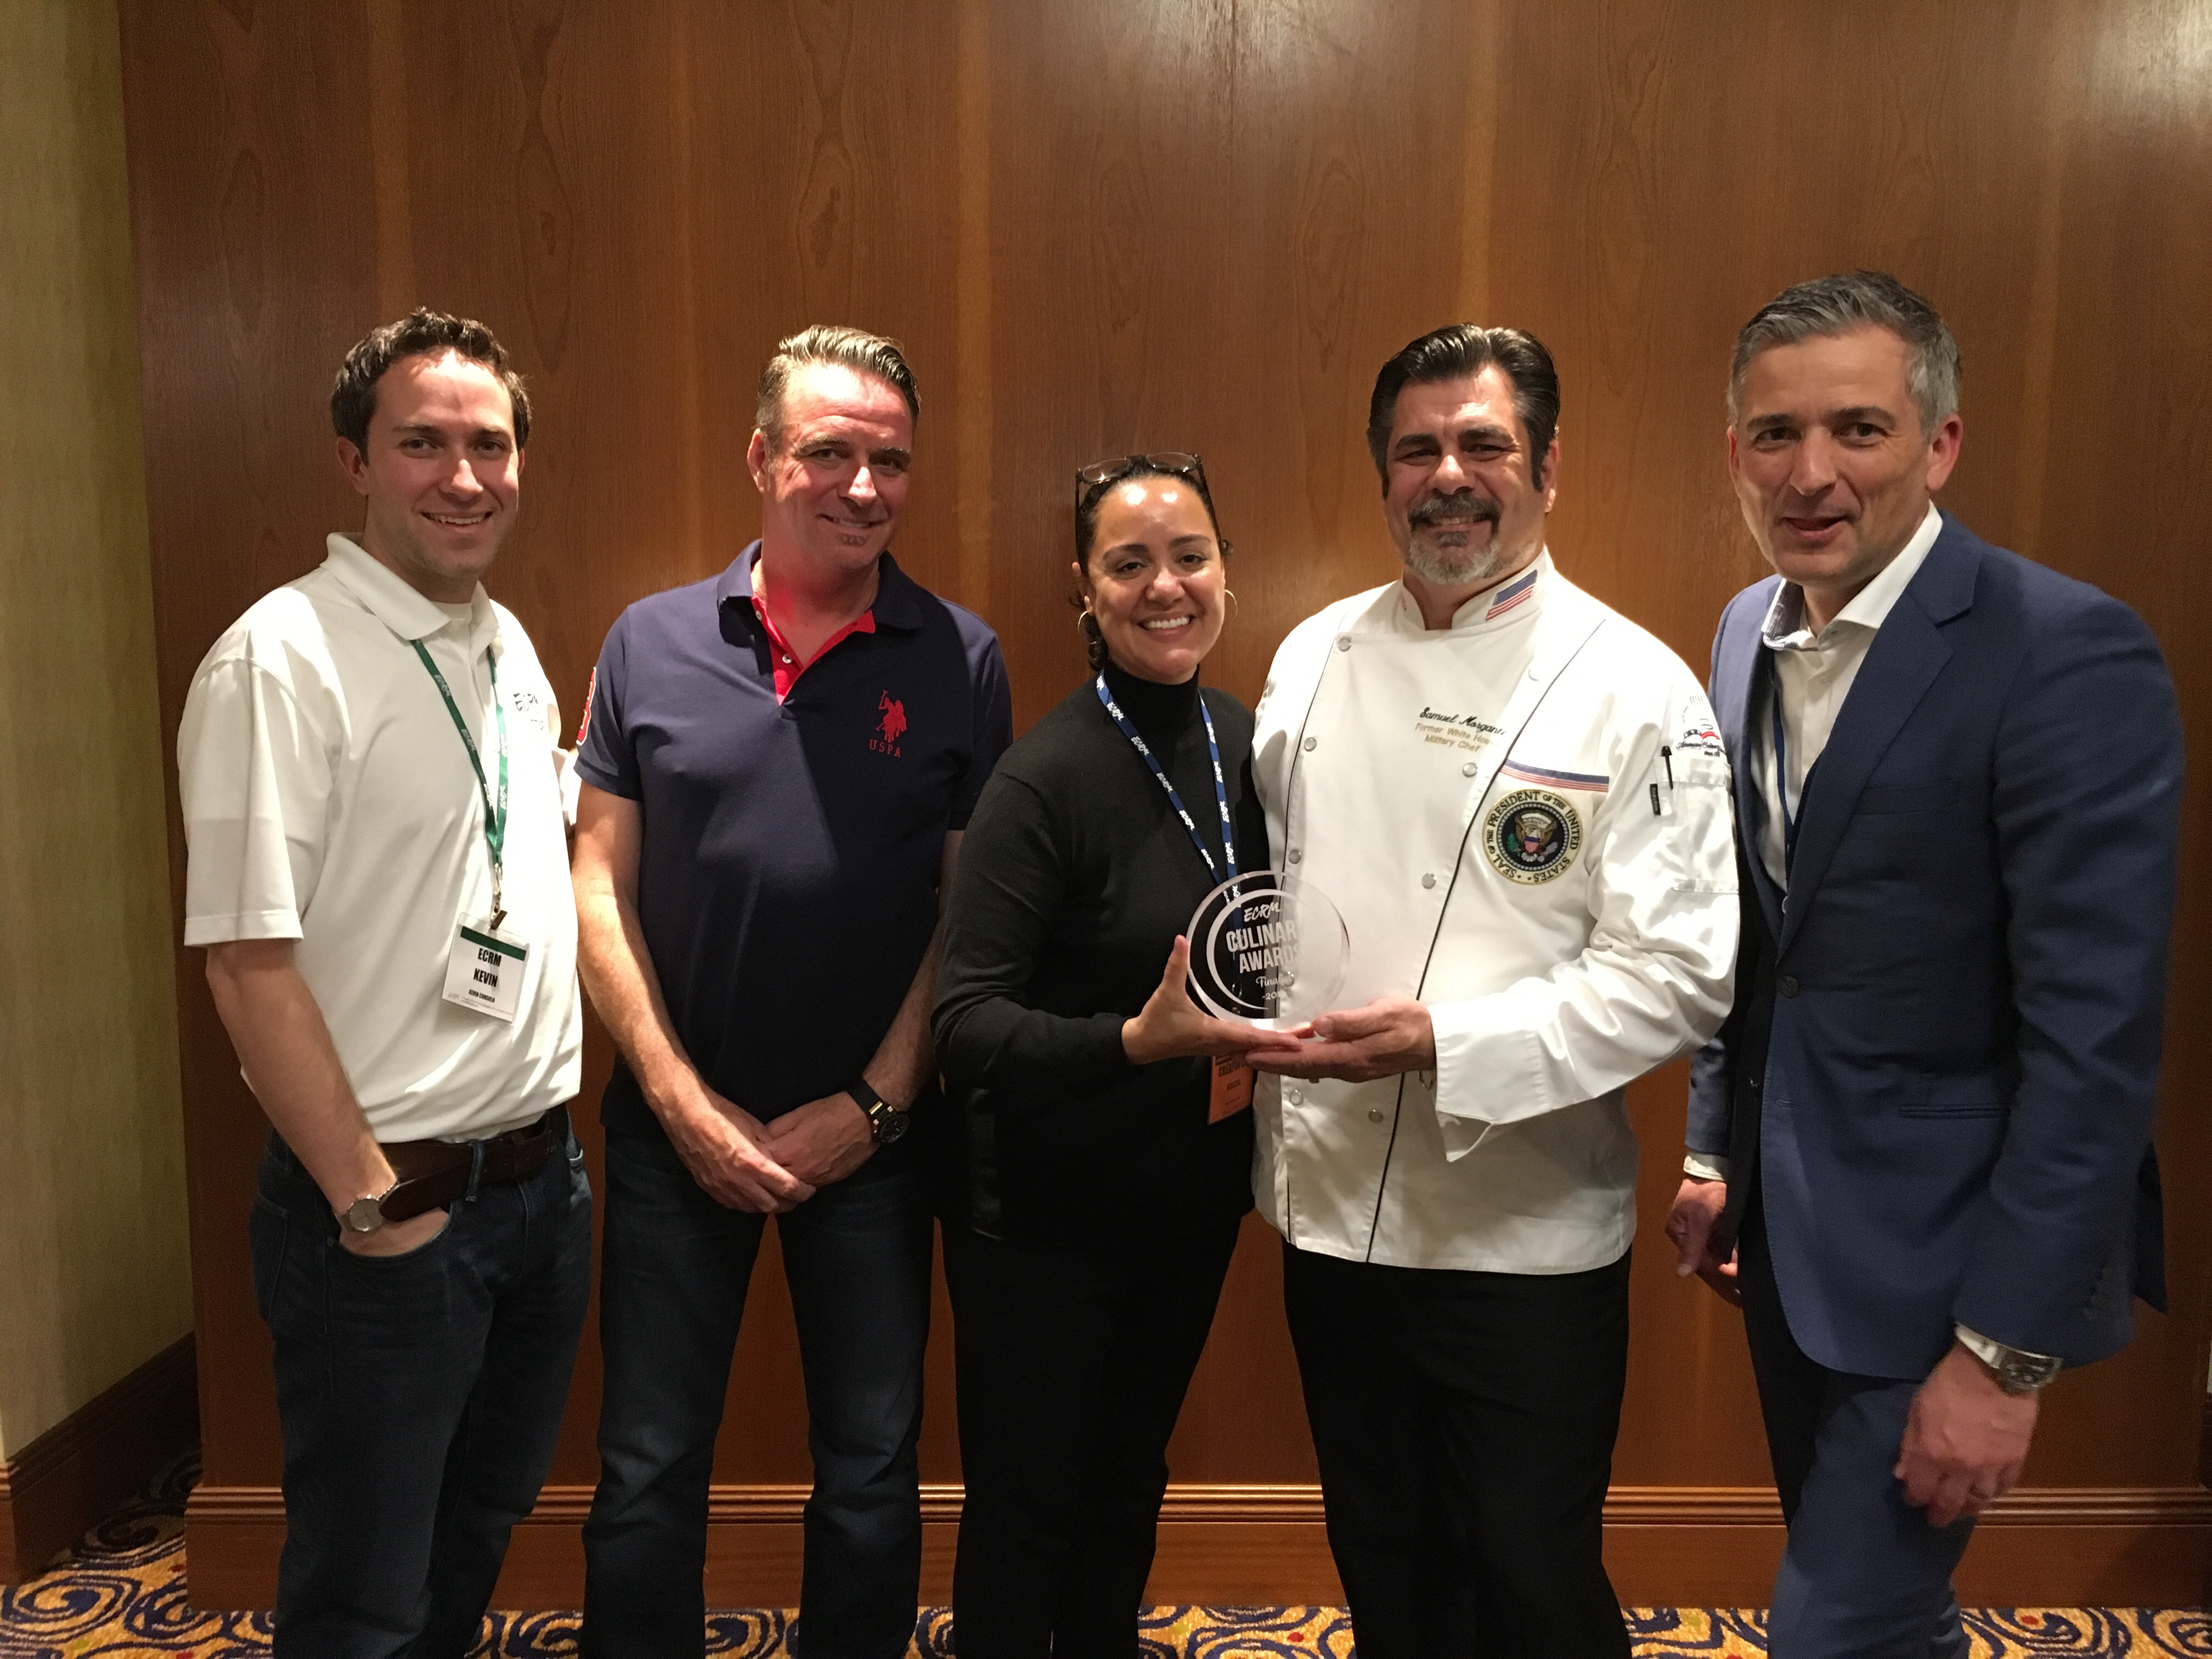 From Left: ECRM's Kevin Consolo, Crêapan's Ron Holland, Rebecca Velázquez-Marien, and Jan Marien with Chef Sam Morgante